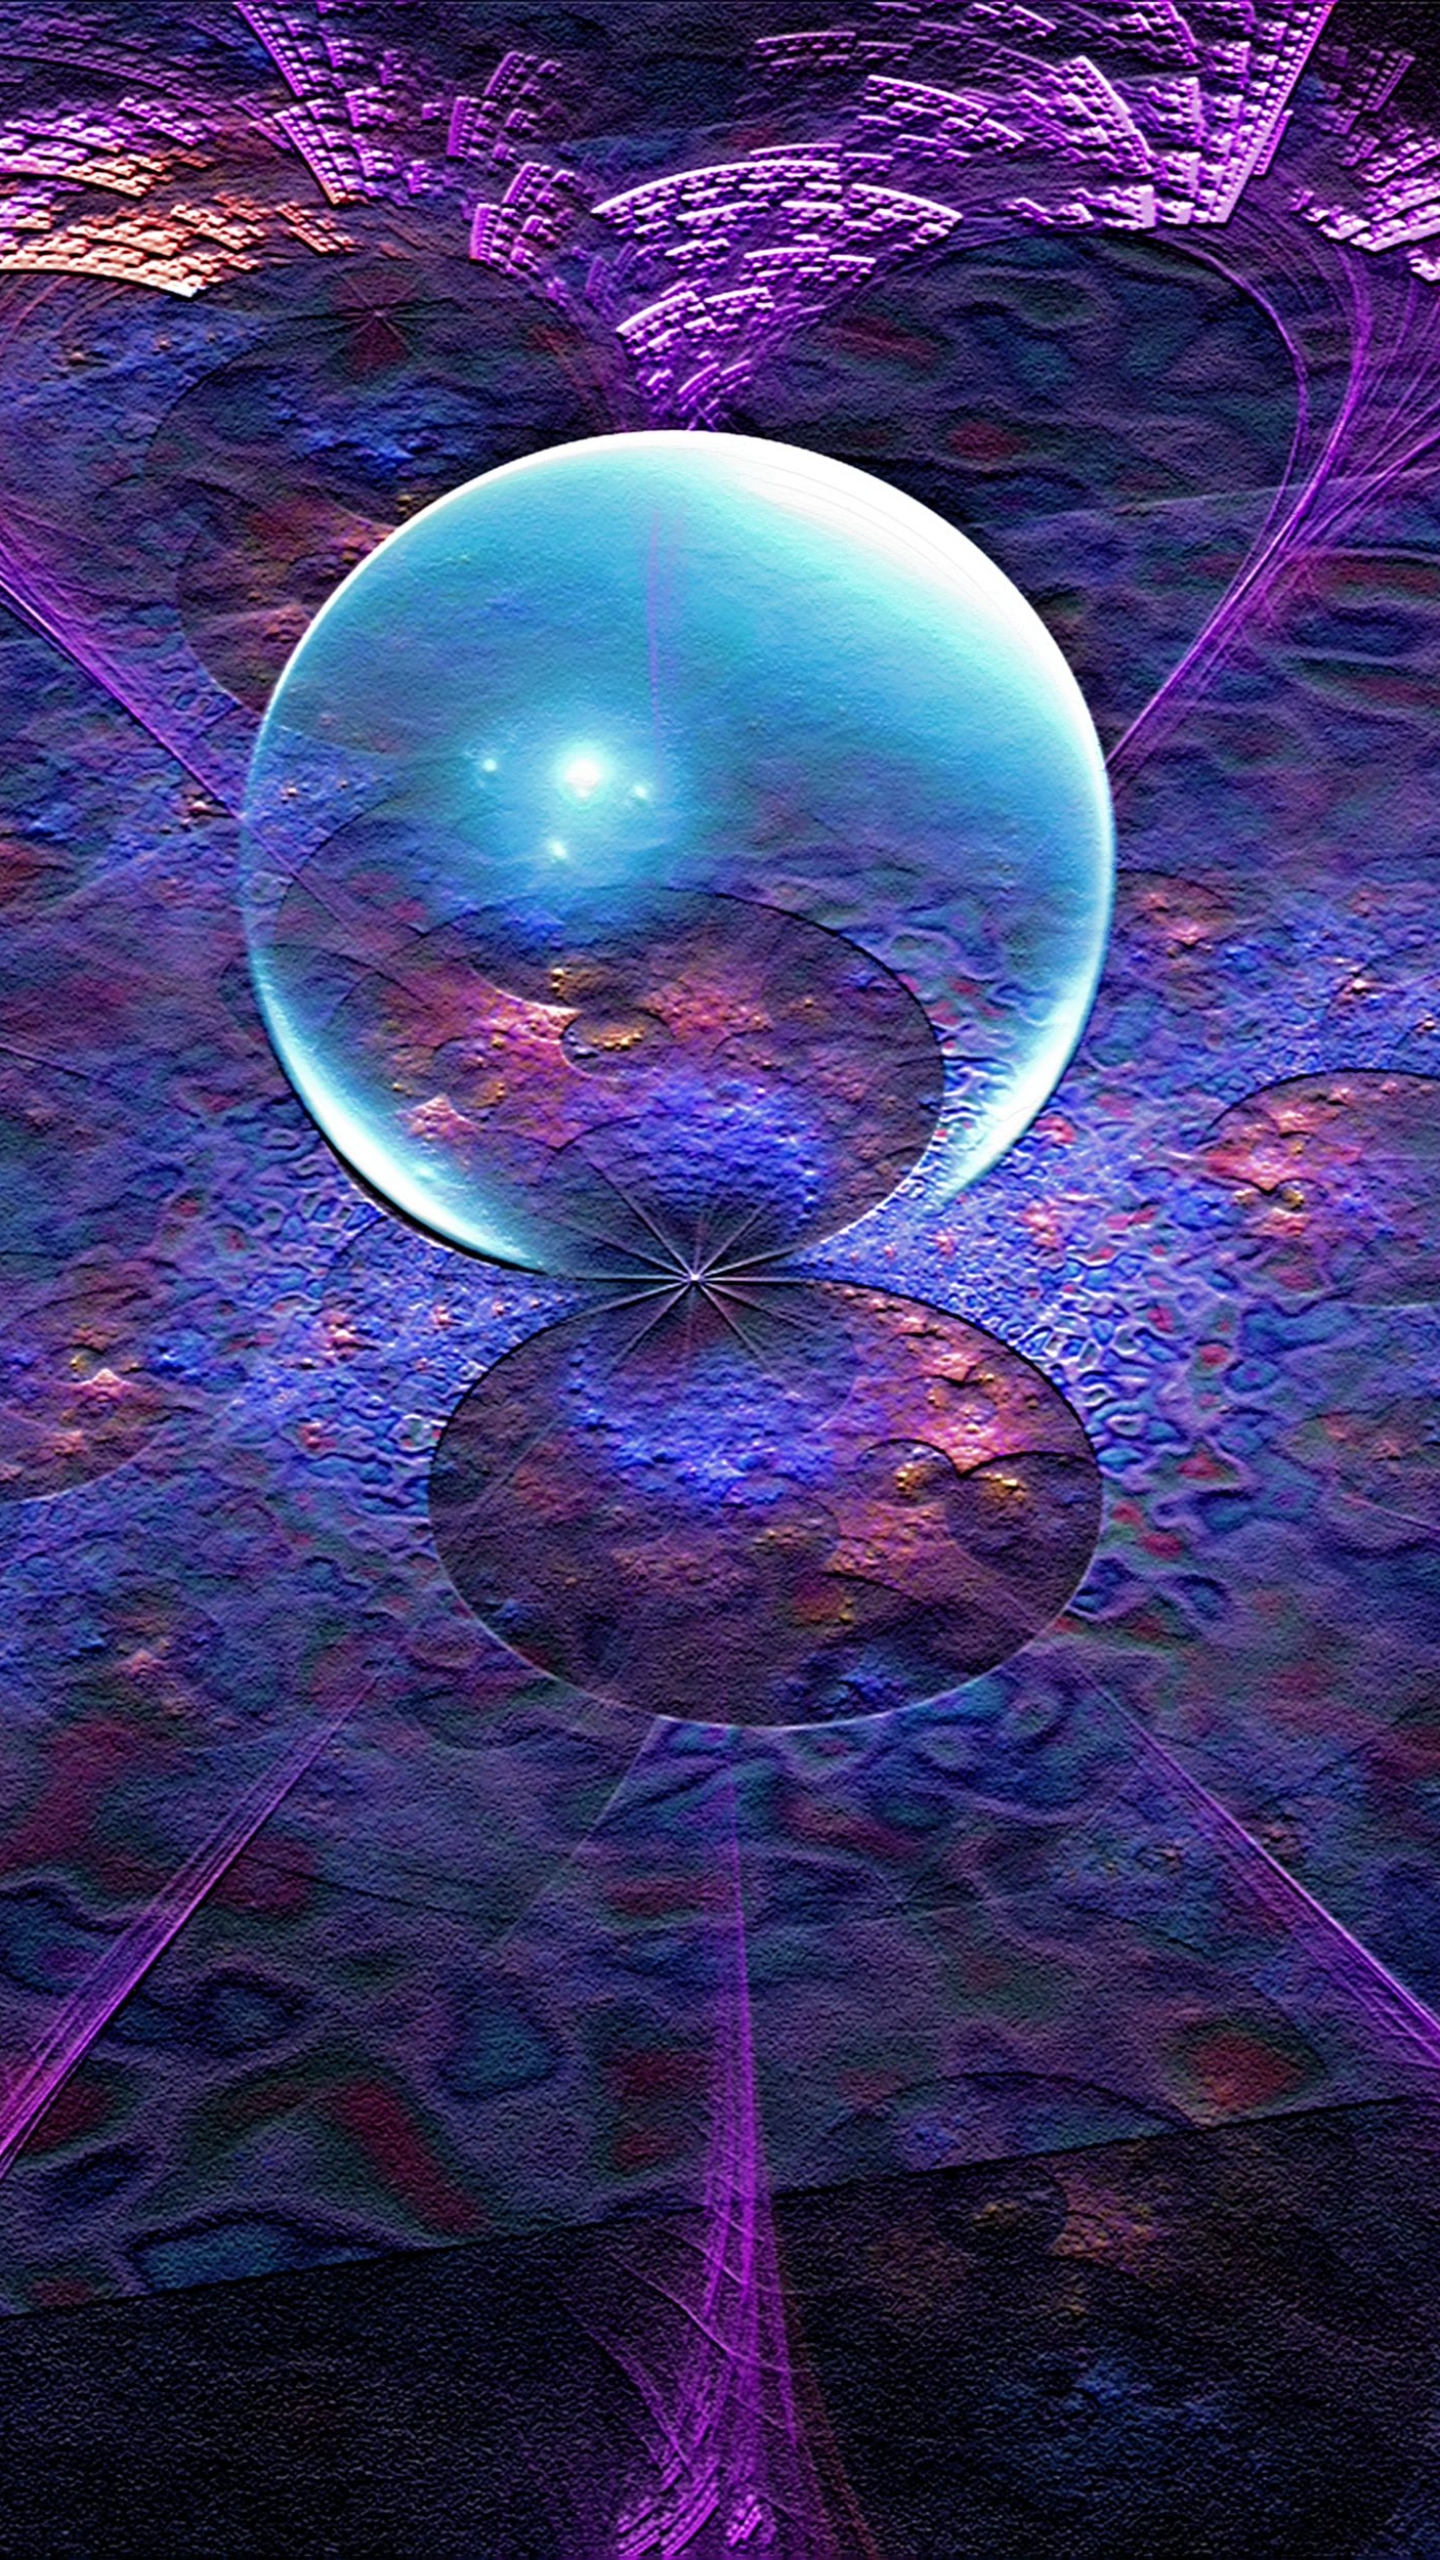 purple, abstract, sphere, reflection, orb